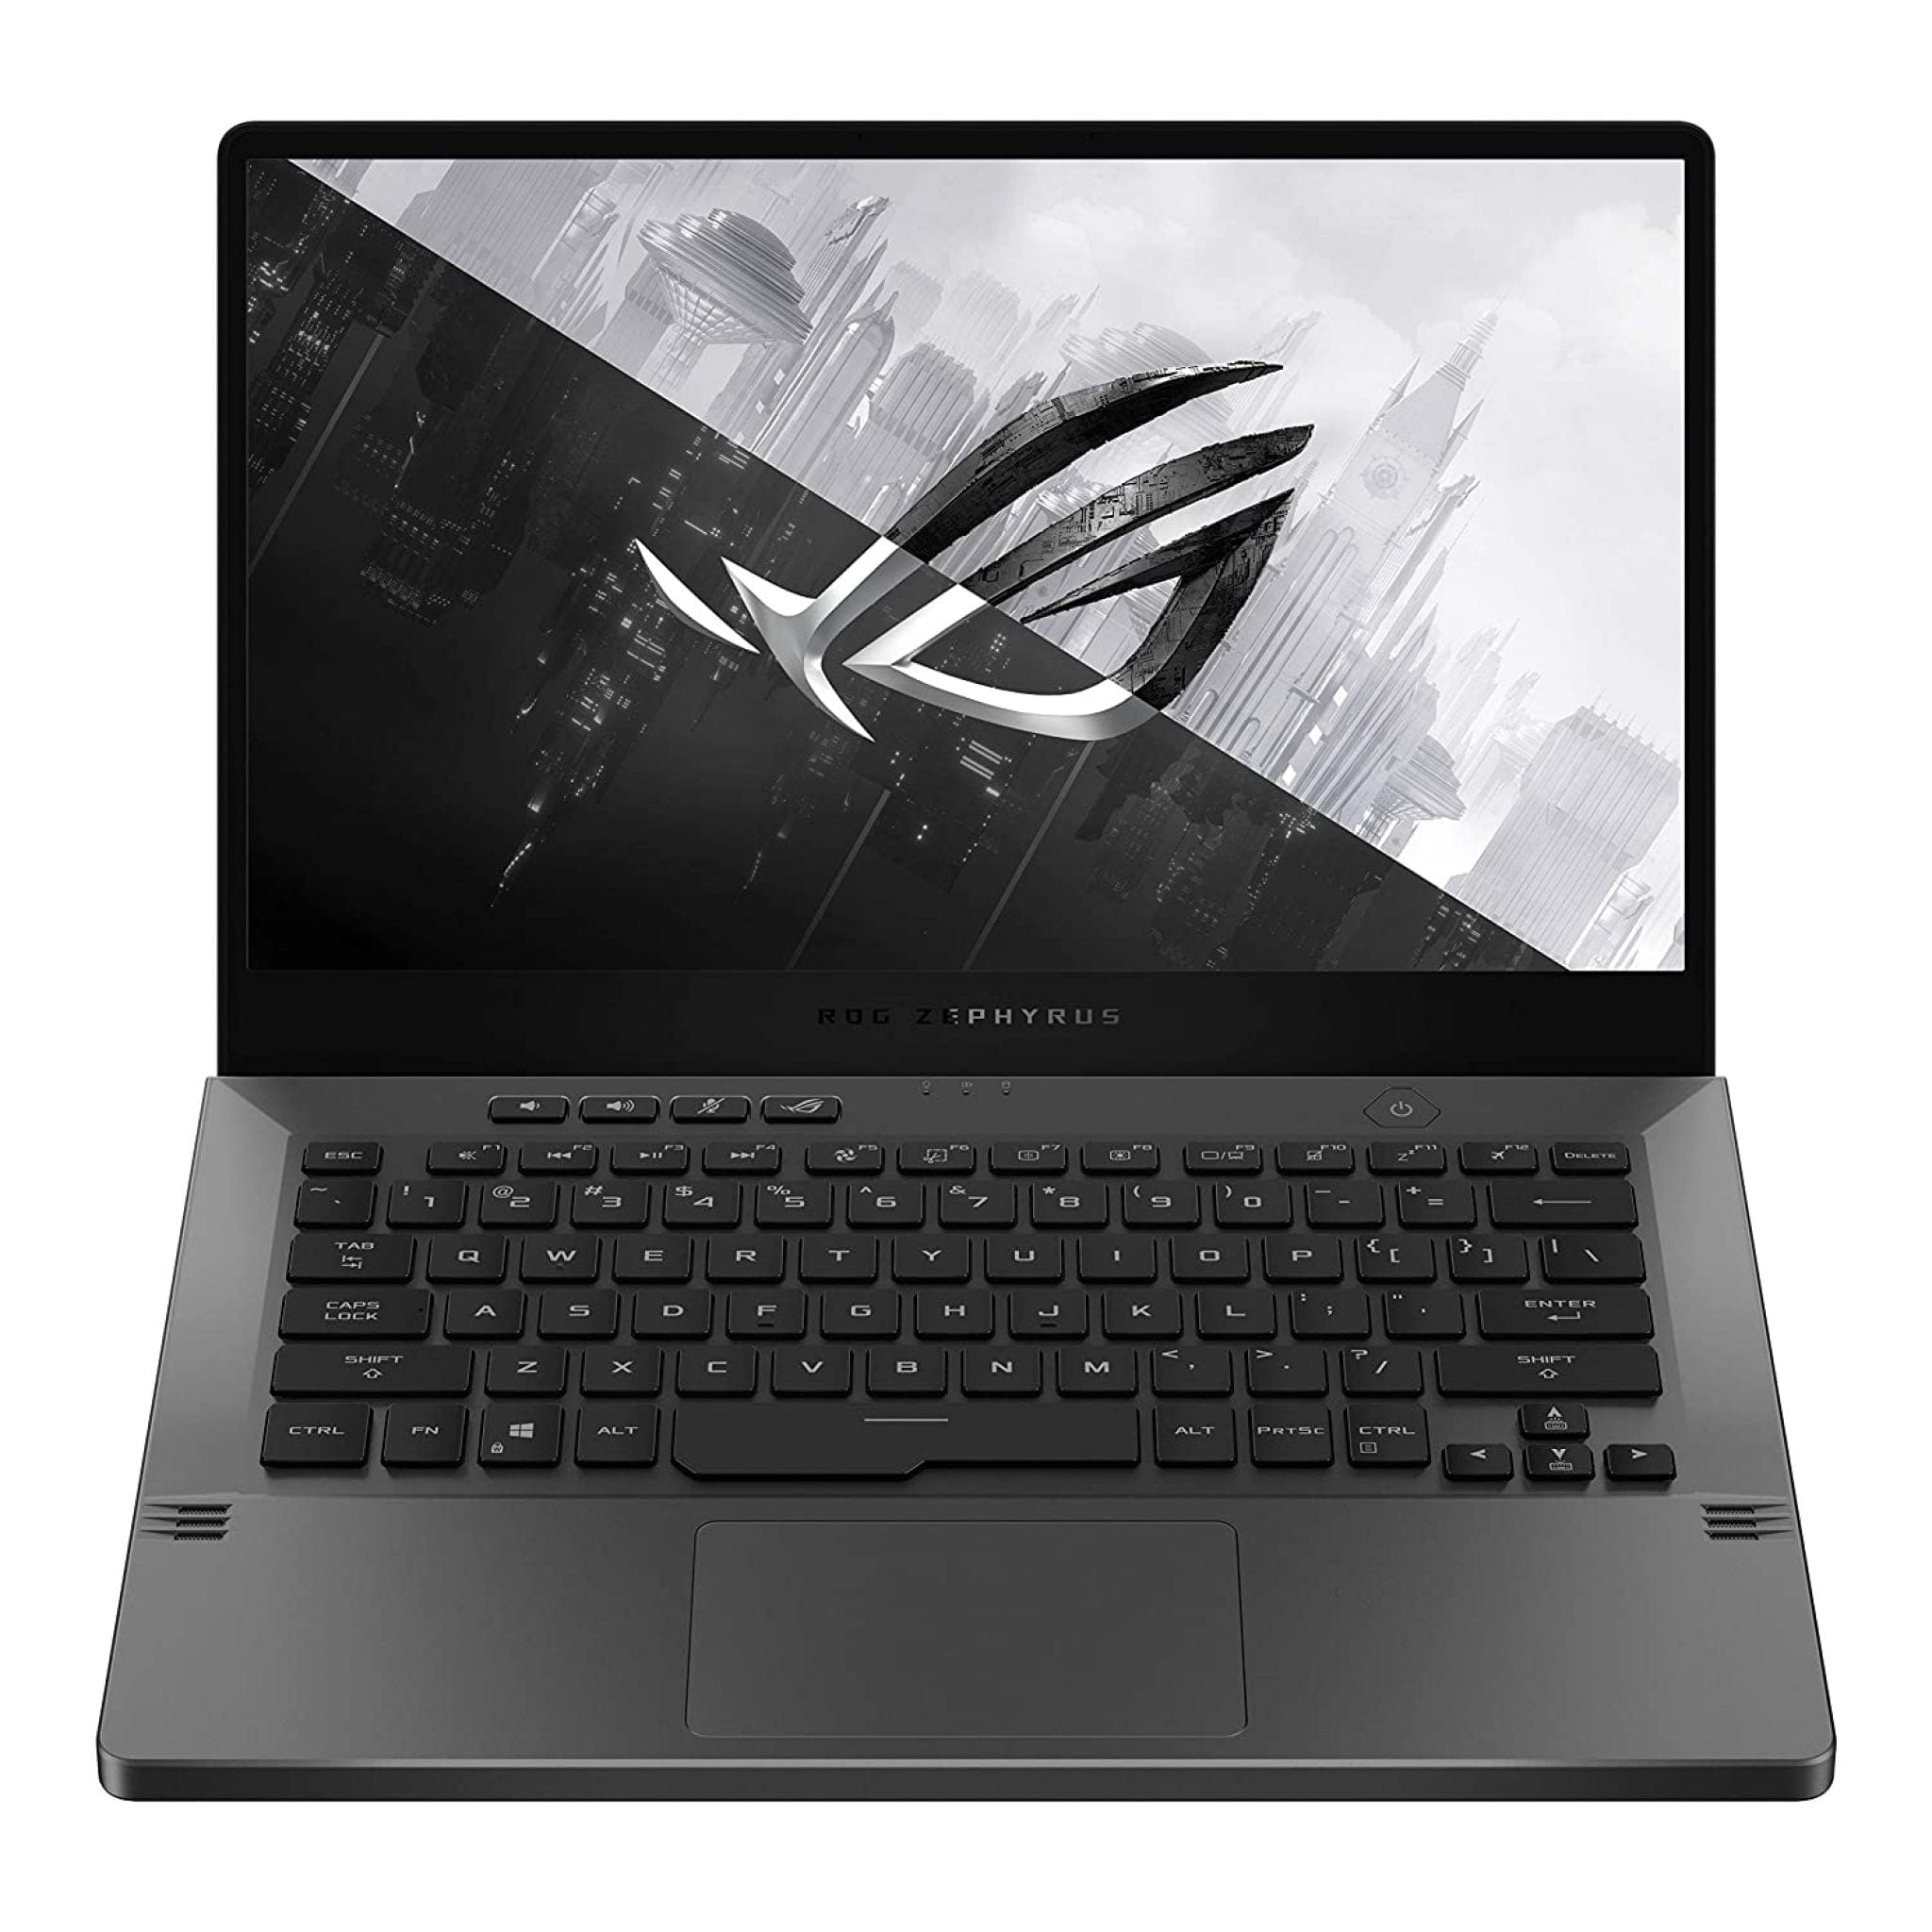 [Top 10] Best Gaming Laptops Under 1 Lakh (Buyer's Review)